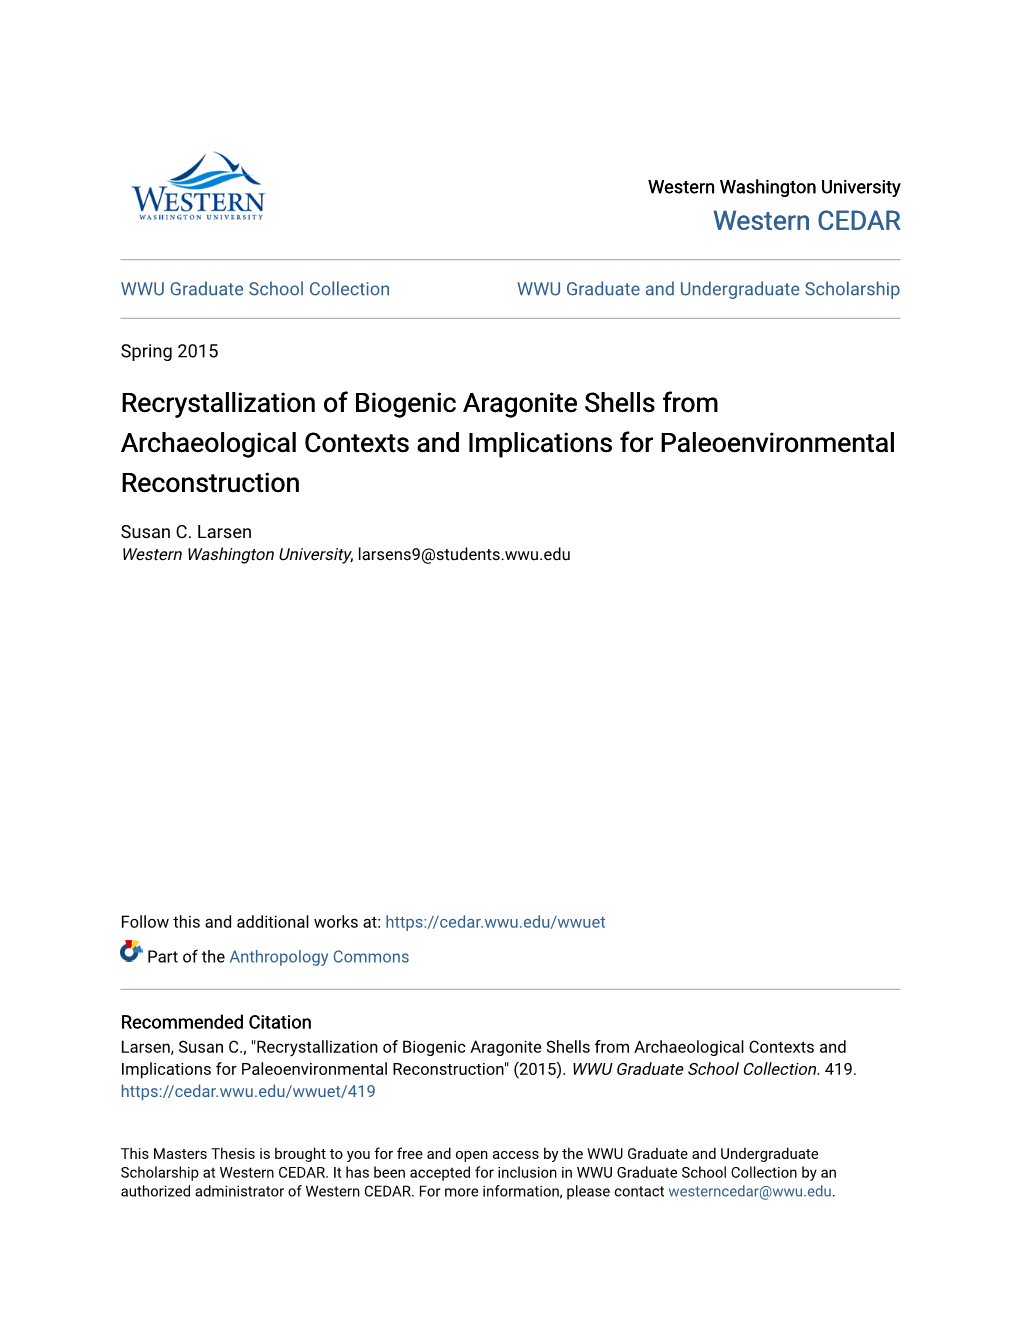 Recrystallization of Biogenic Aragonite Shells from Archaeological Contexts and Implications for Paleoenvironmental Reconstruction